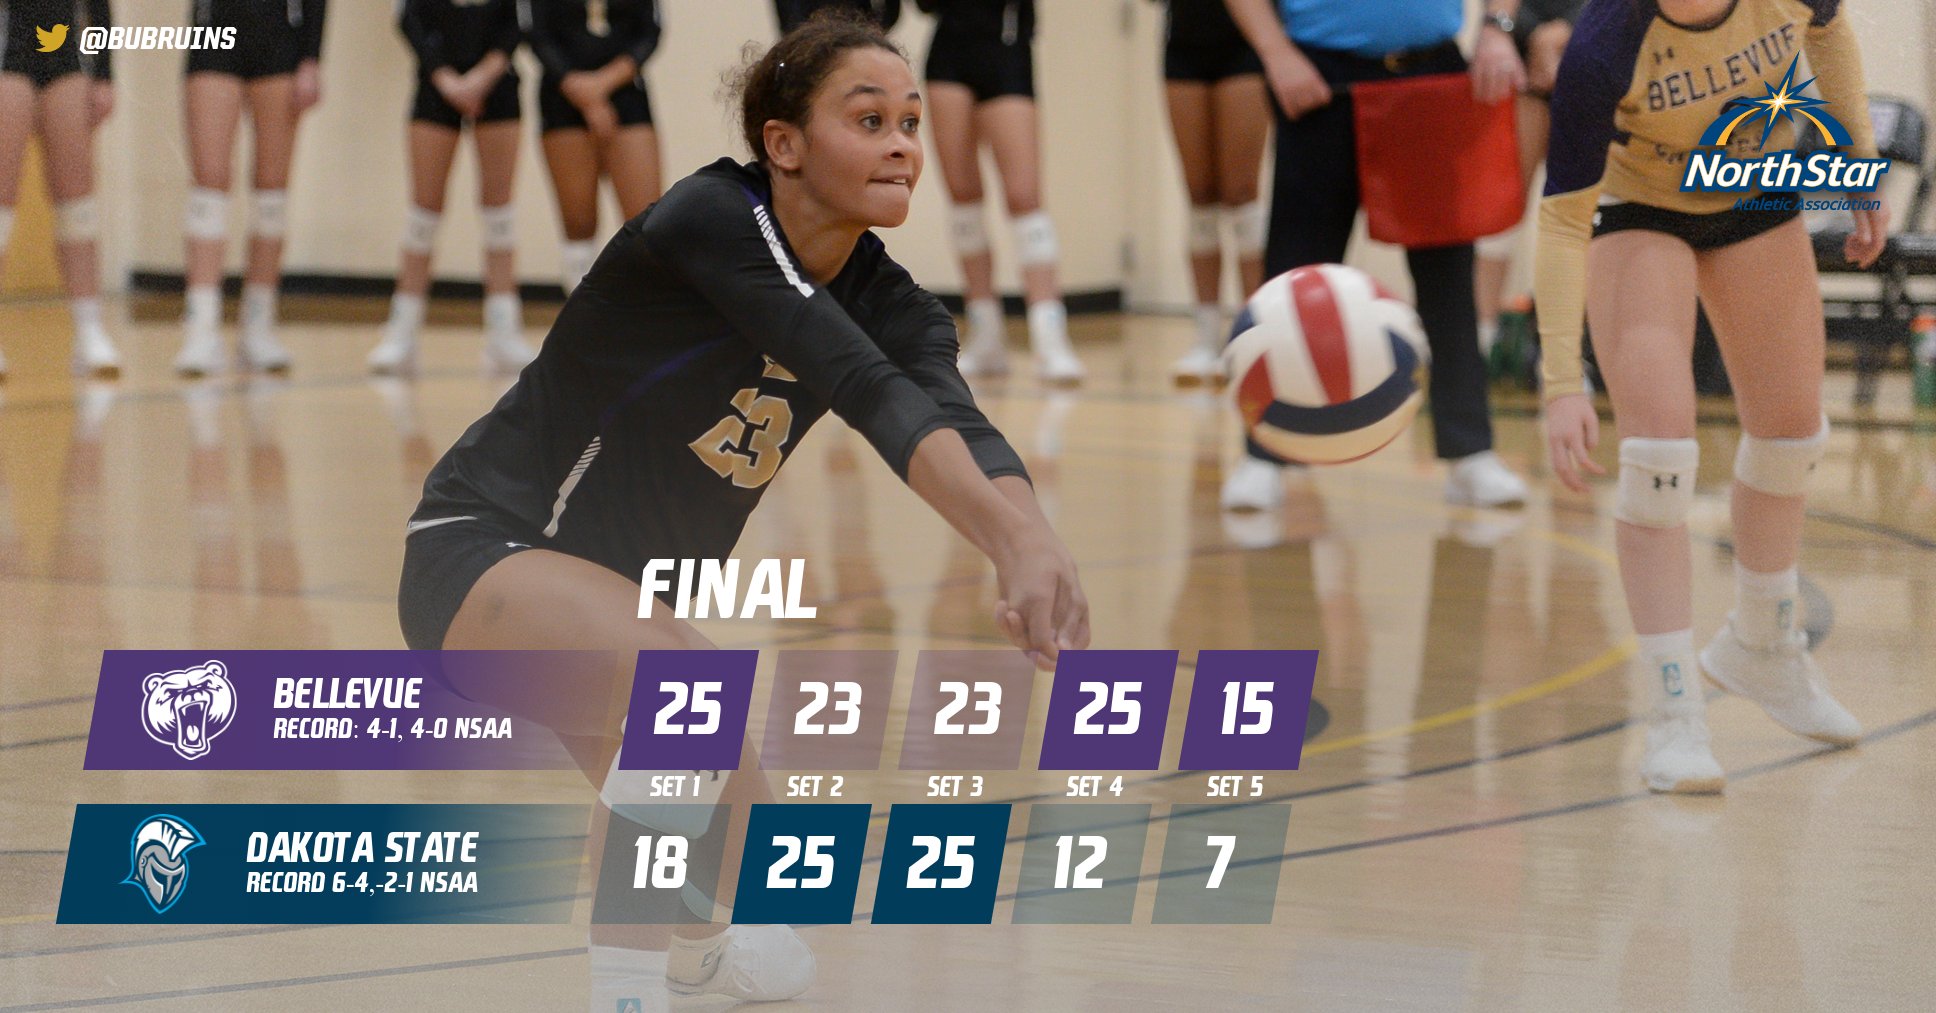 Fountain fuels Bruin 5-set victory